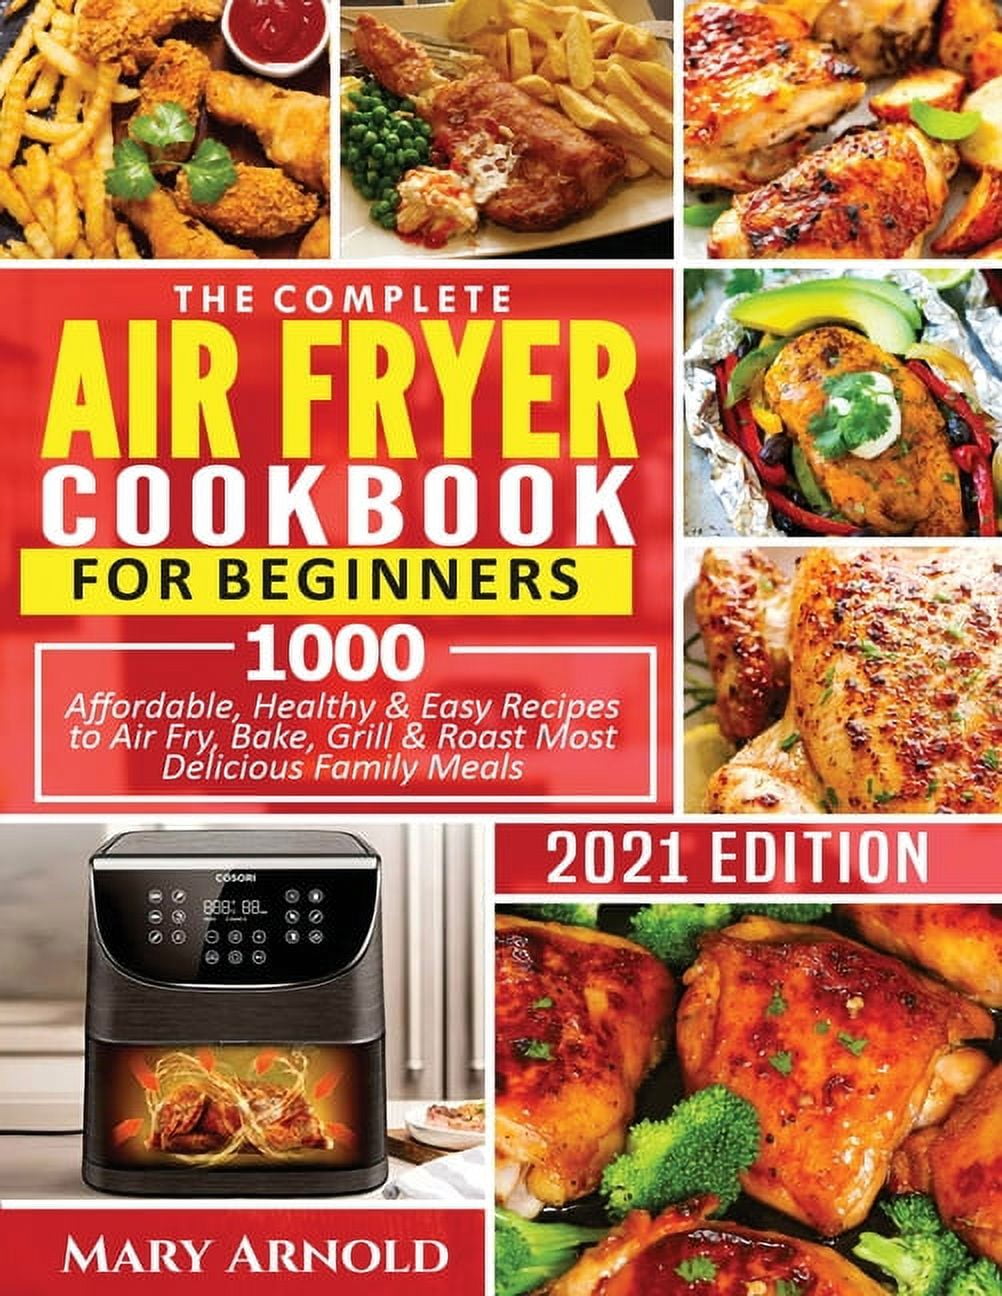 2 EASY Holiday Treats in the AIR FRYER & Air Fryer Cookbook Giveaway! 